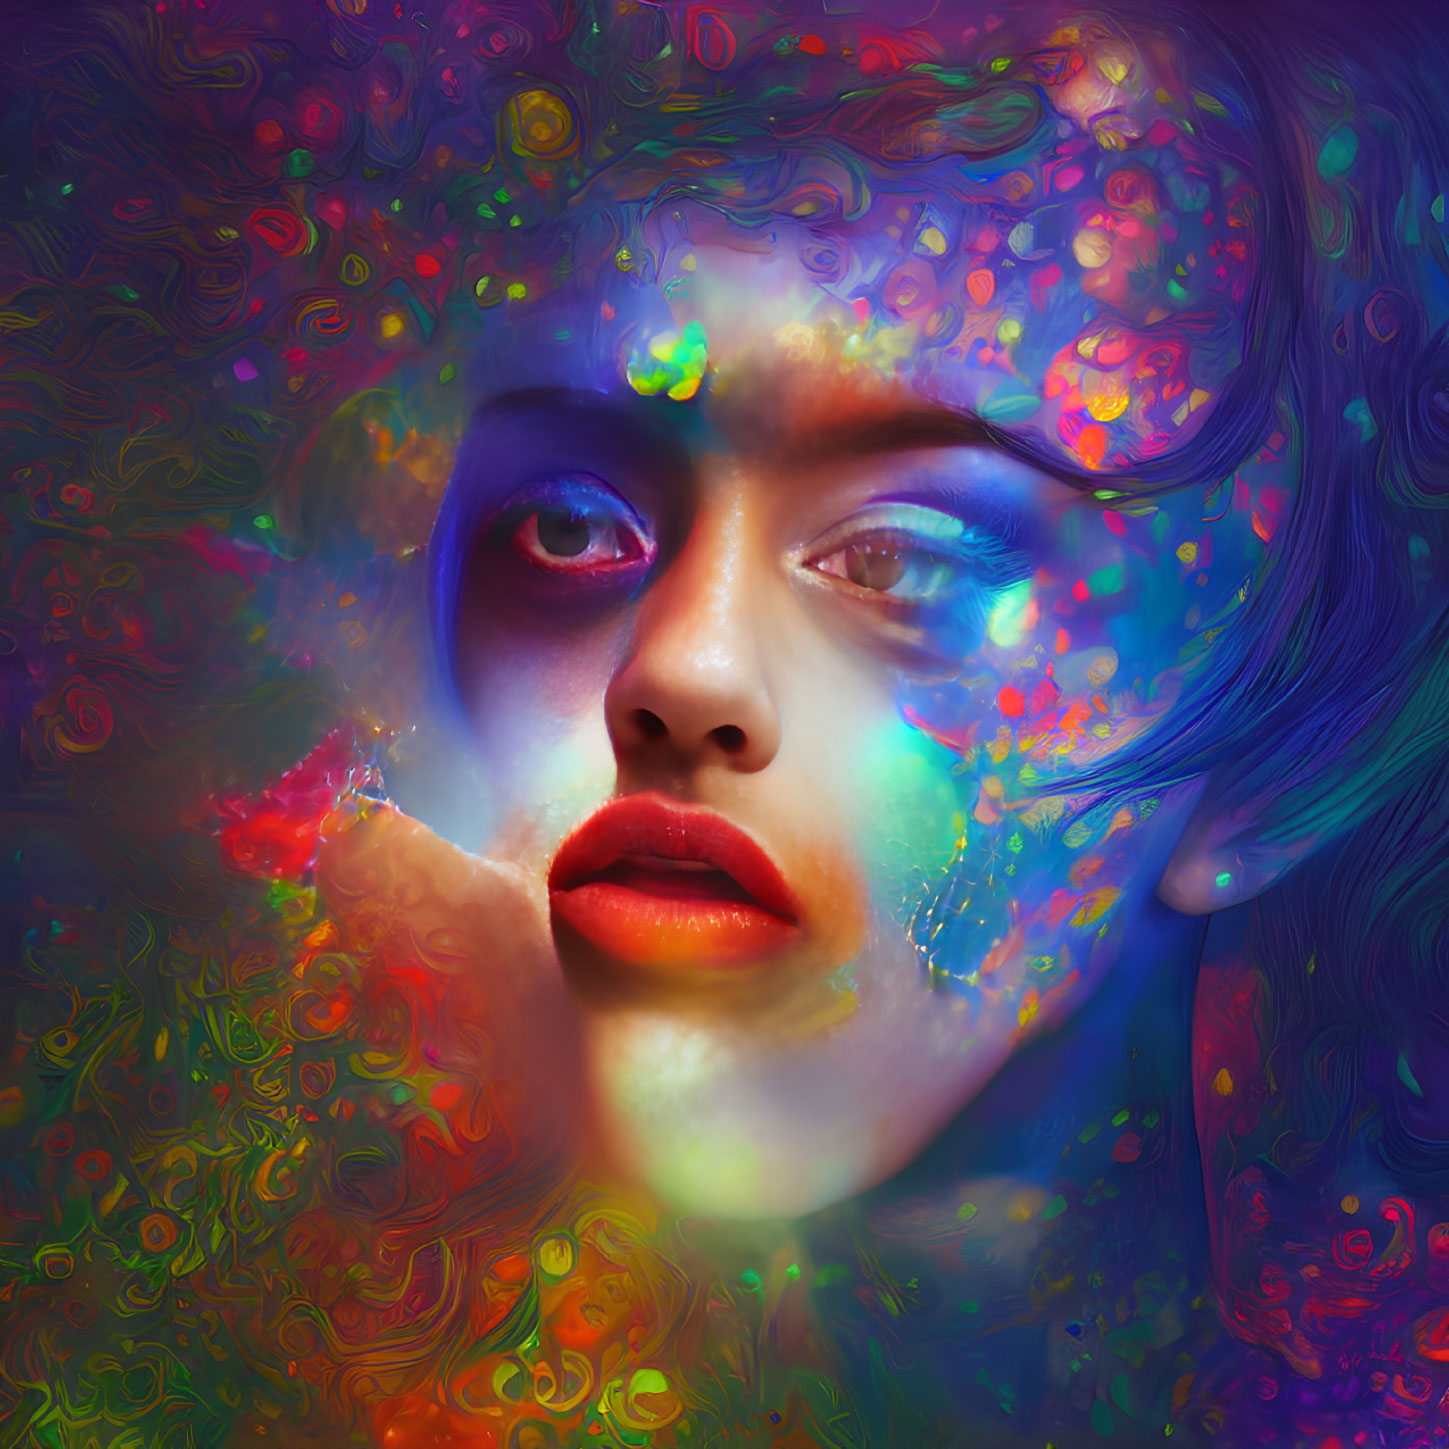 Colorful digital portrait of a woman's face with swirling, dreamlike features